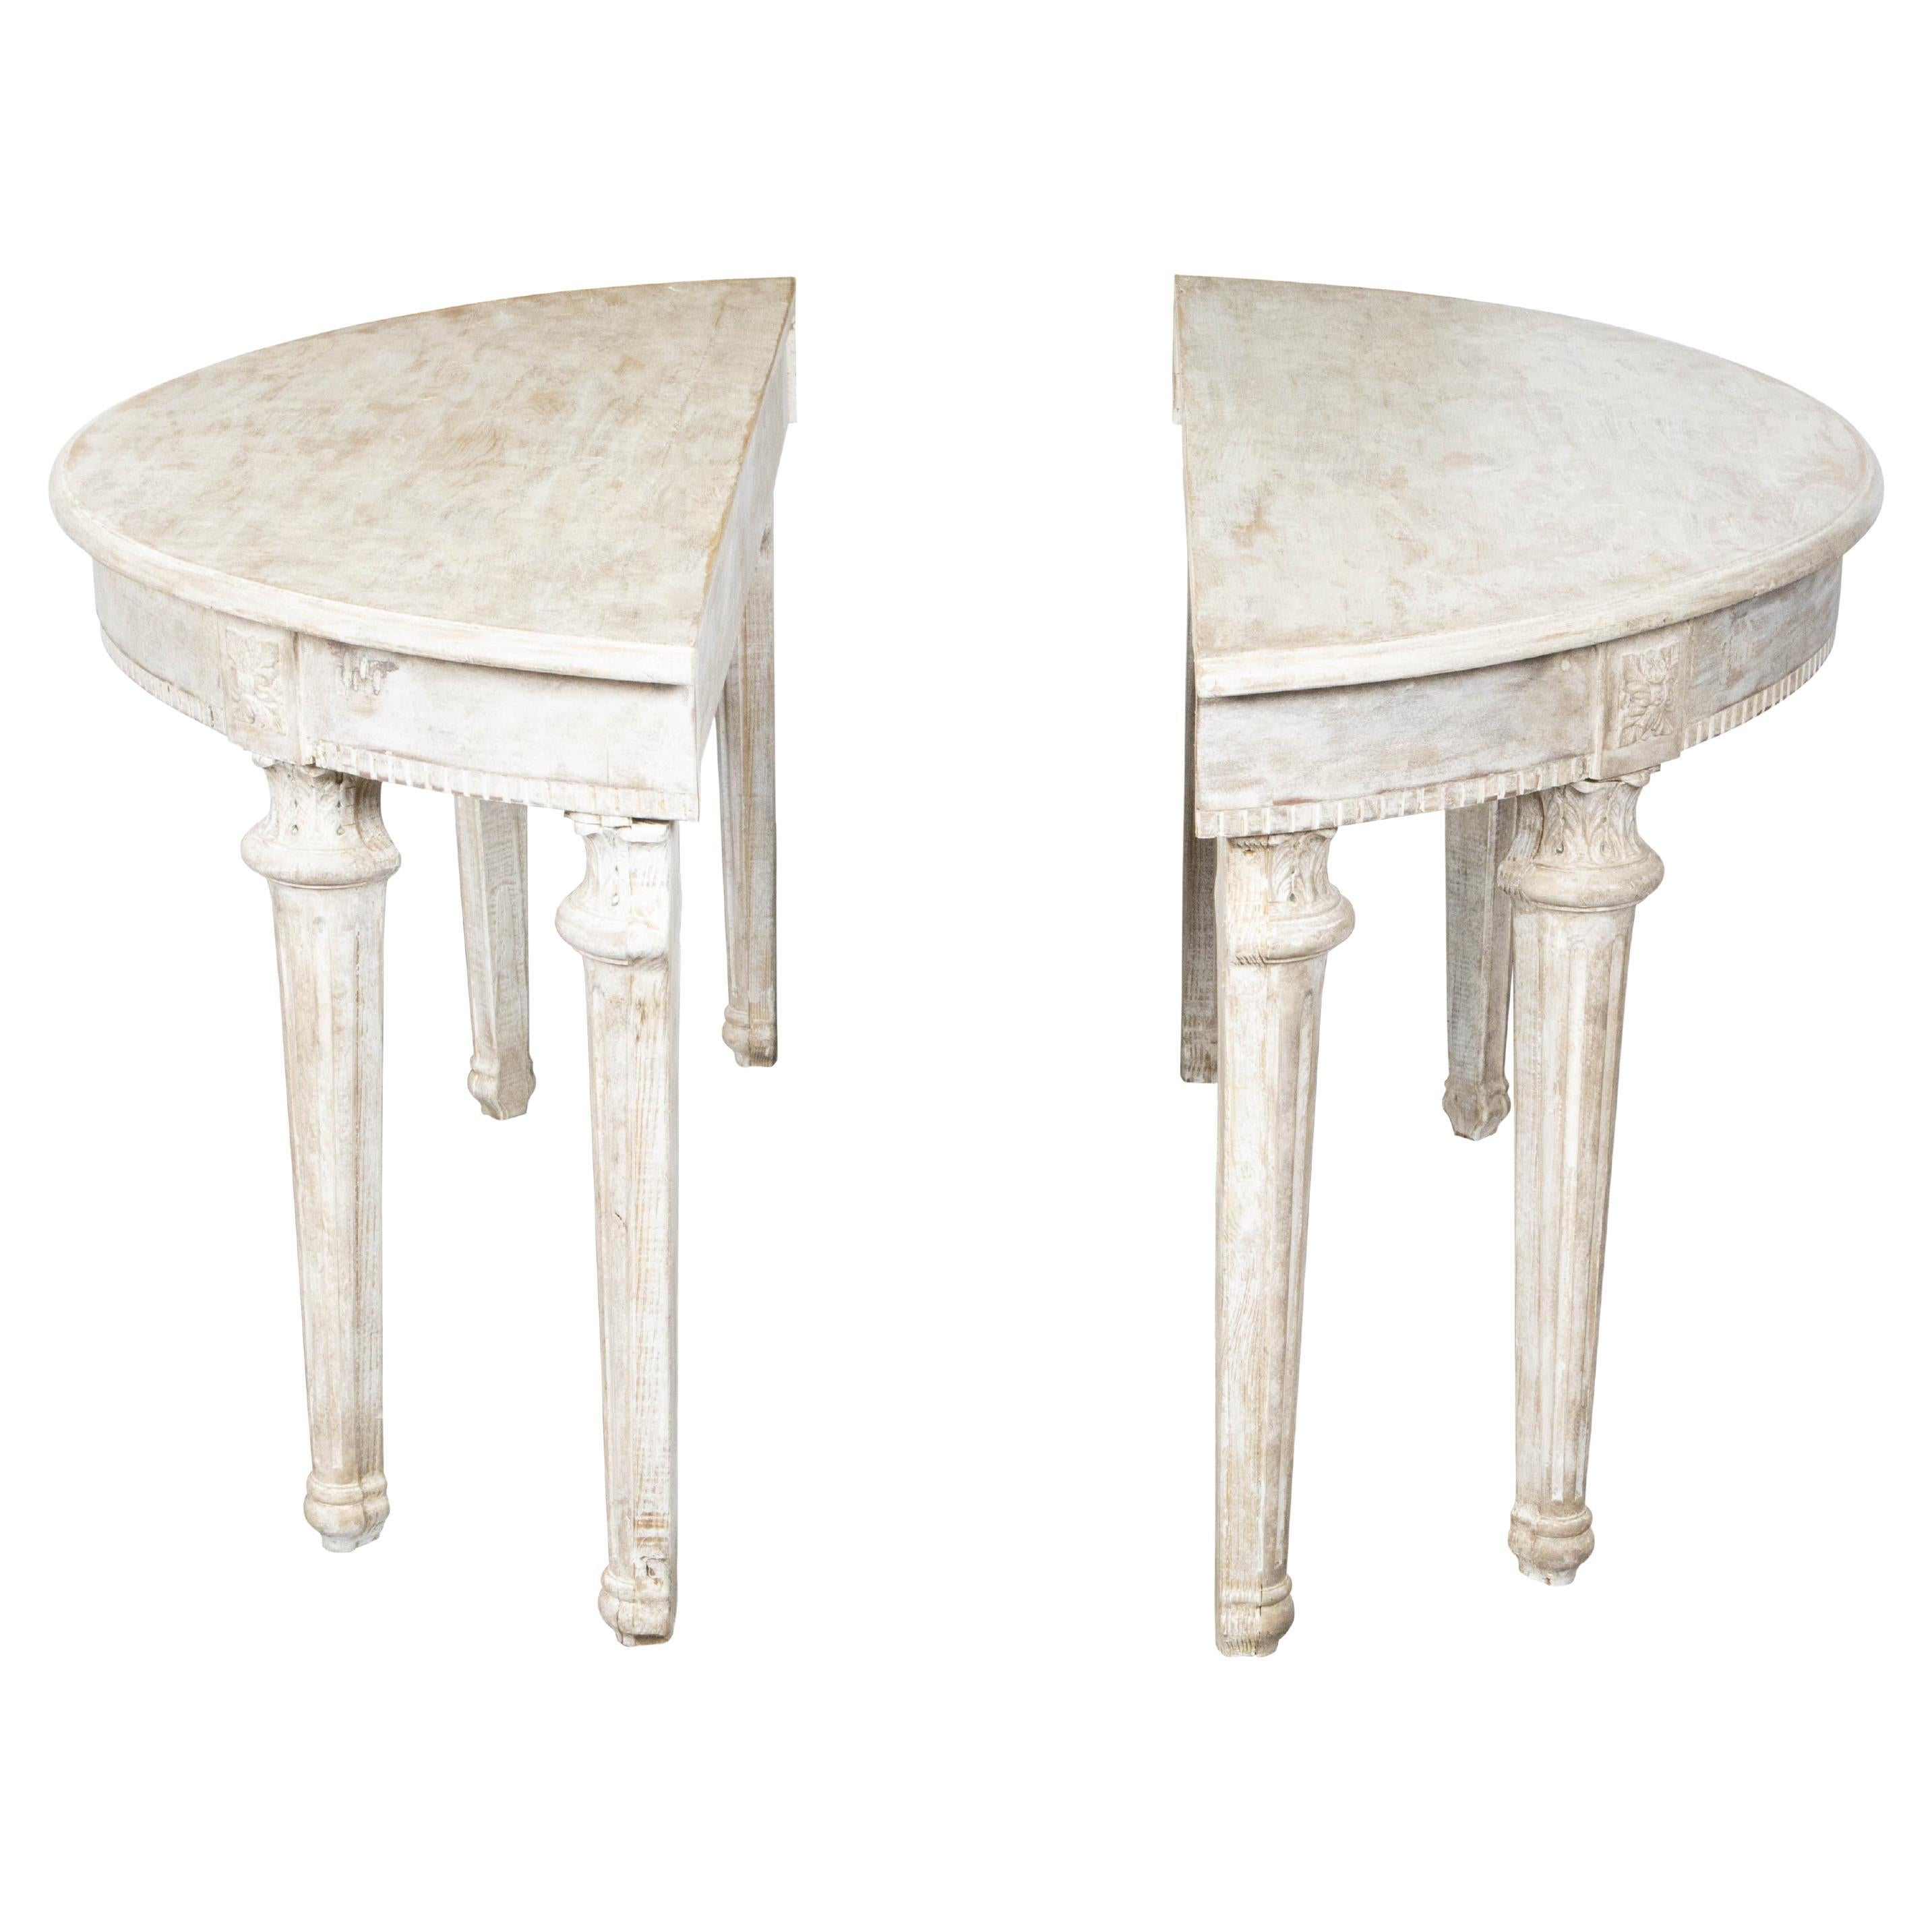 Pair of French Neoclassical Style 1880s Demilune Tables with Carved Décor